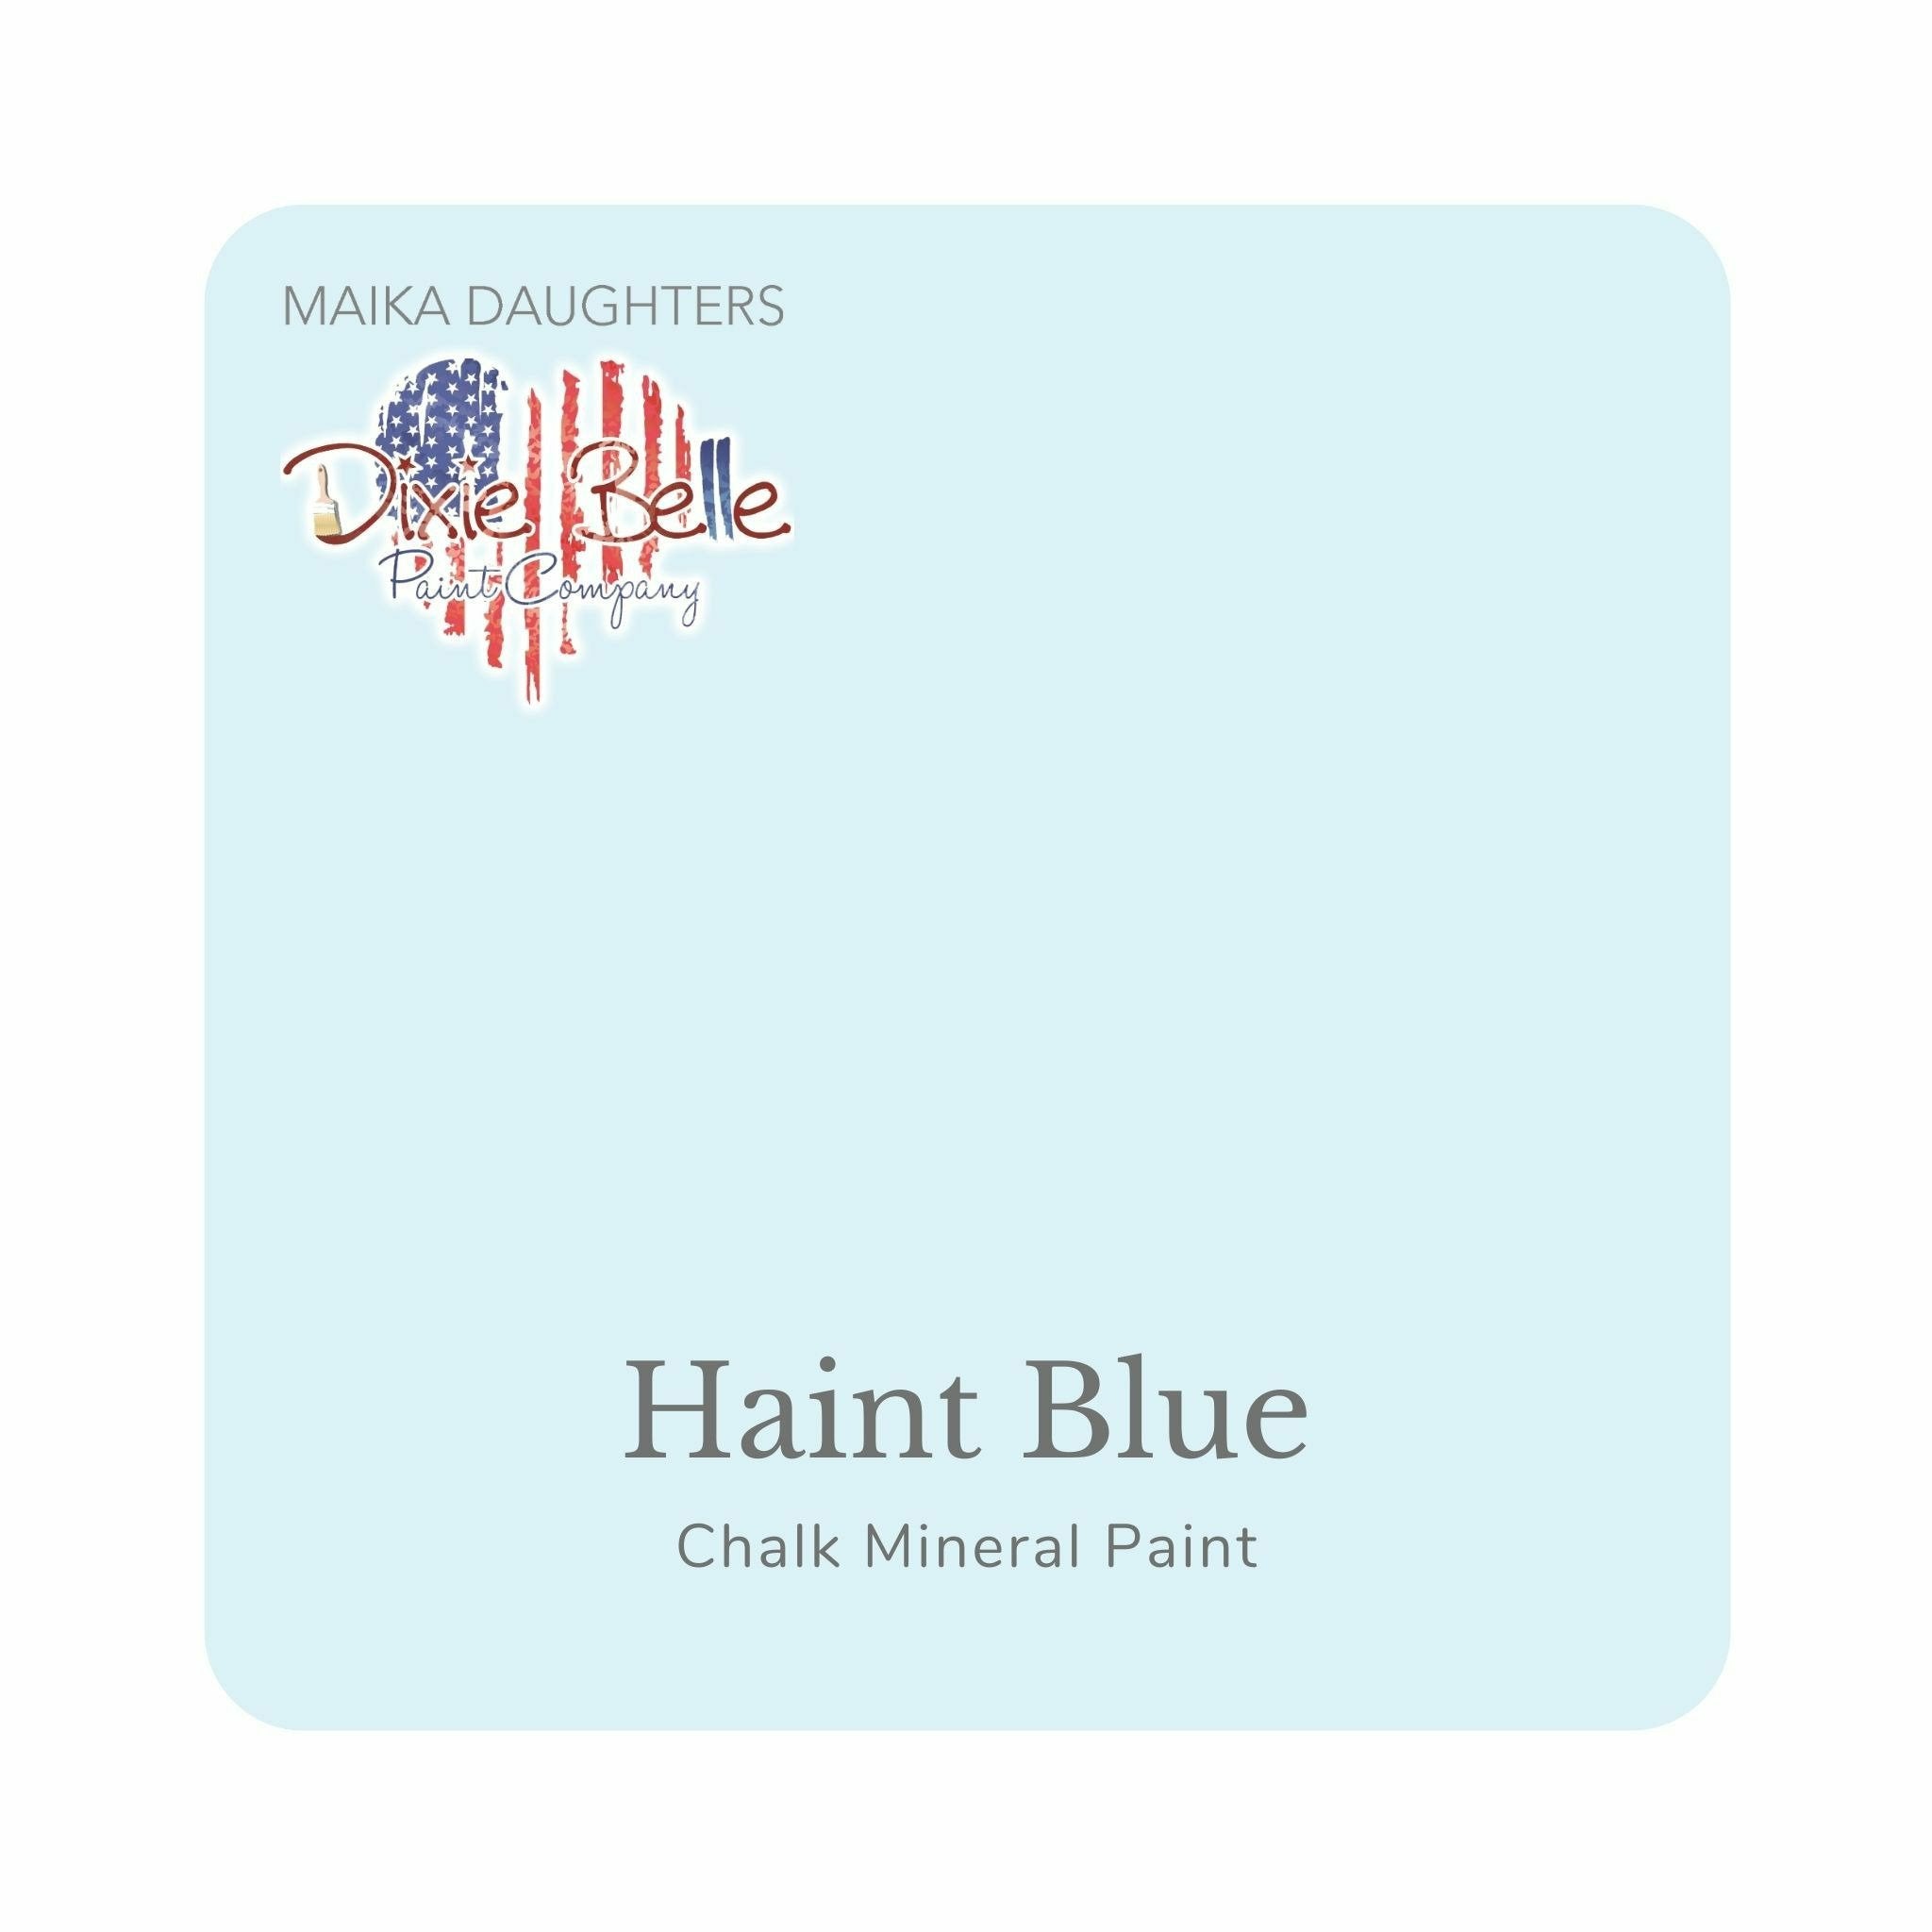 A square swatch card of Dixie Belle Paint Company’s Haint Blue Chalk Mineral Paint is against a white background. This color is a light baby blue